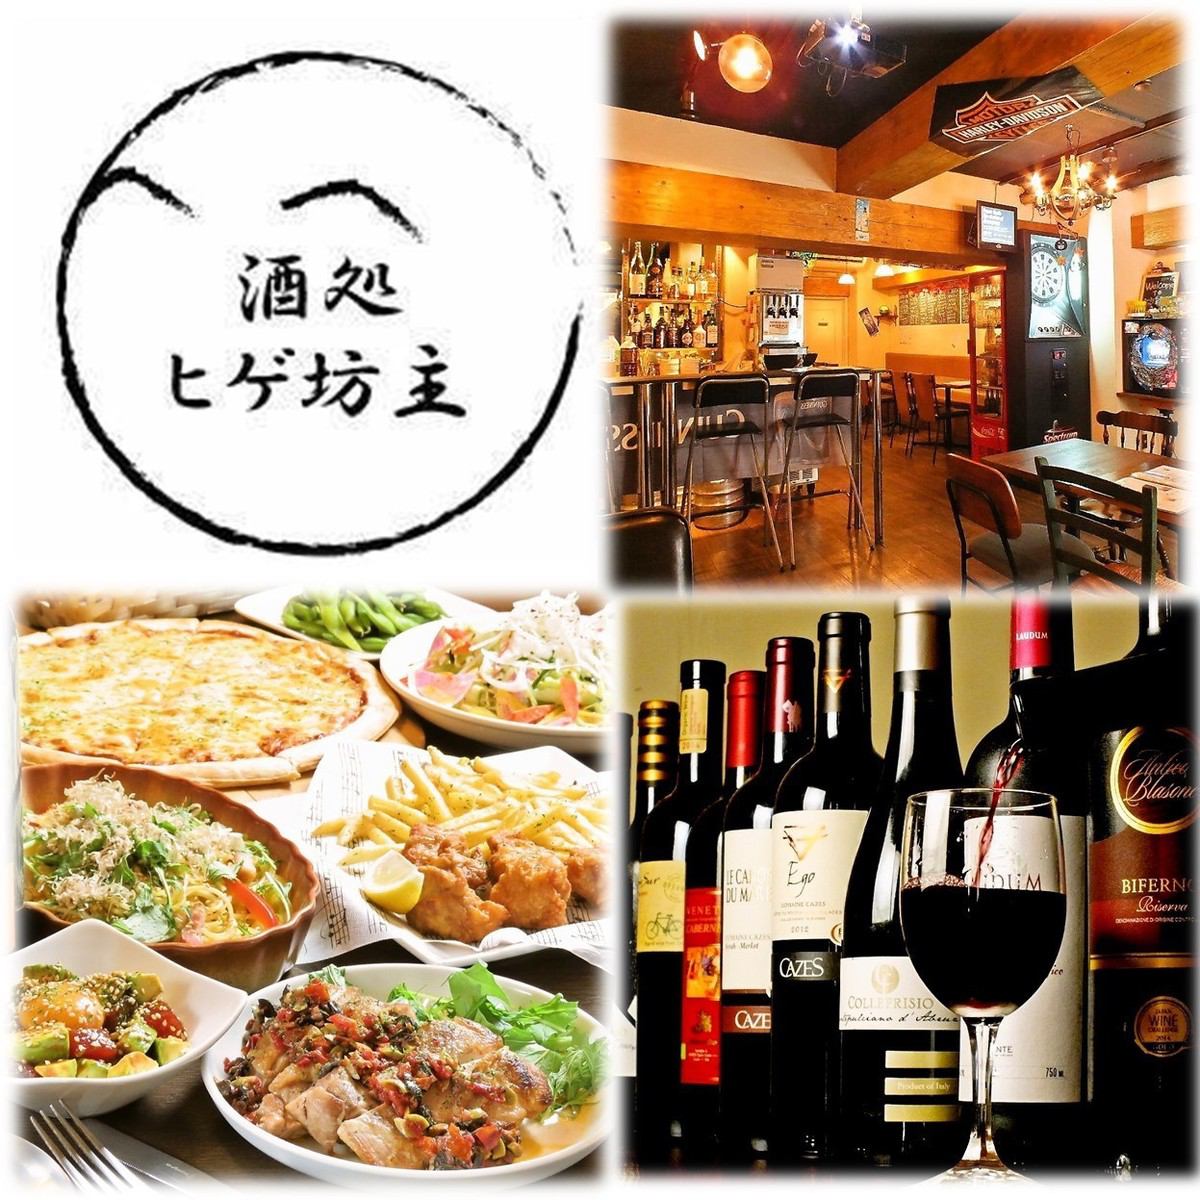 Nishikawaguchi's stylish hideaway Italian ☆ We accept banquets, girls' parties, secondary parties etc. ♪ One person!